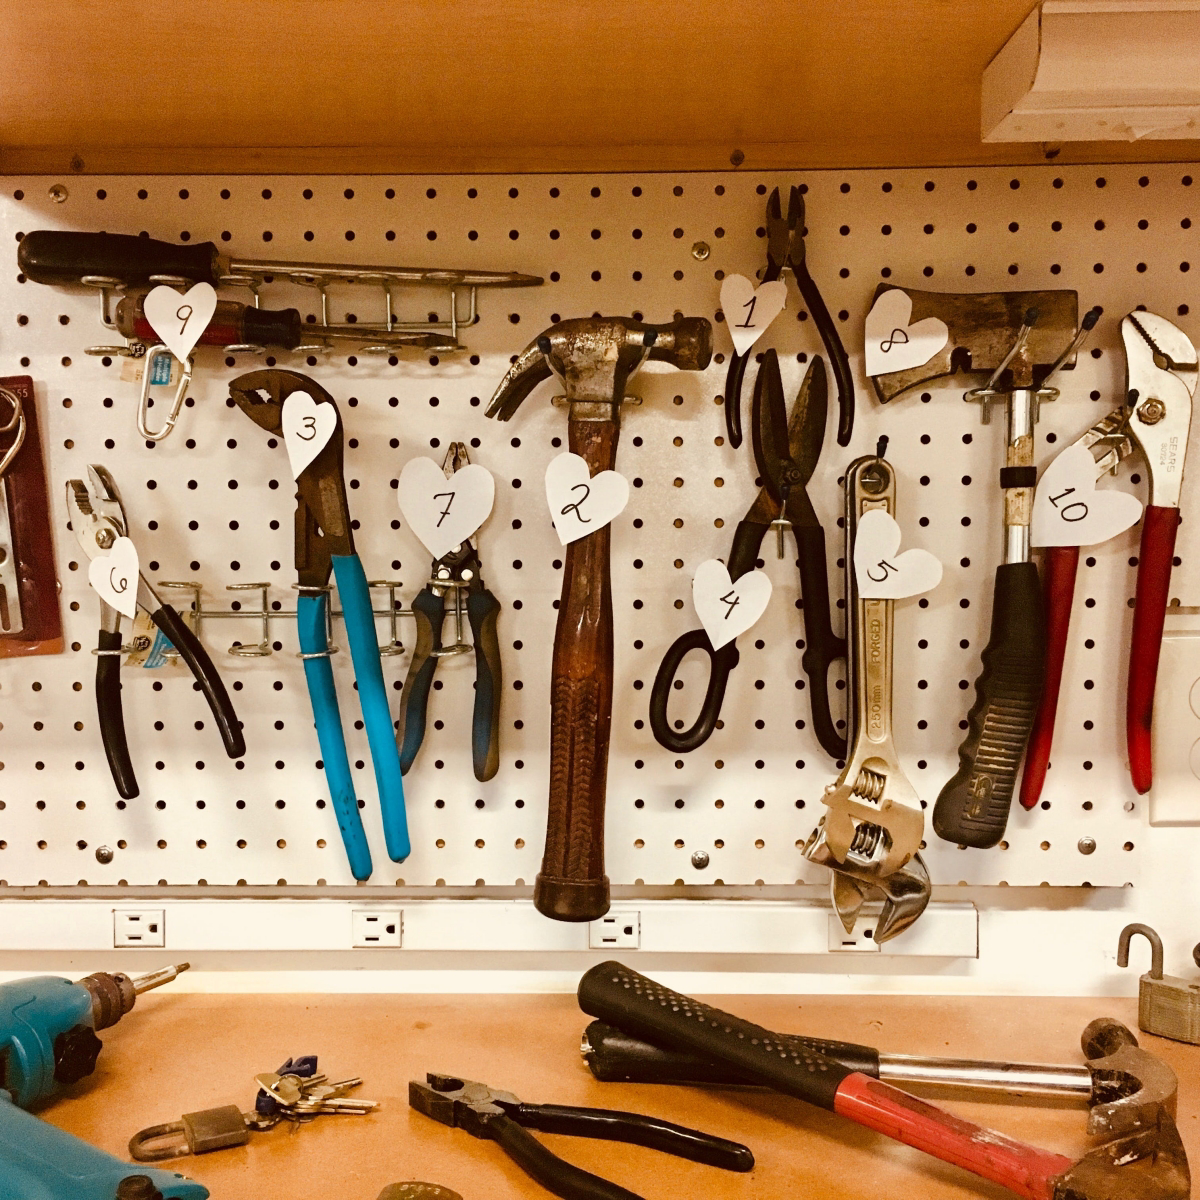 expanding your toolkit for advanced projects